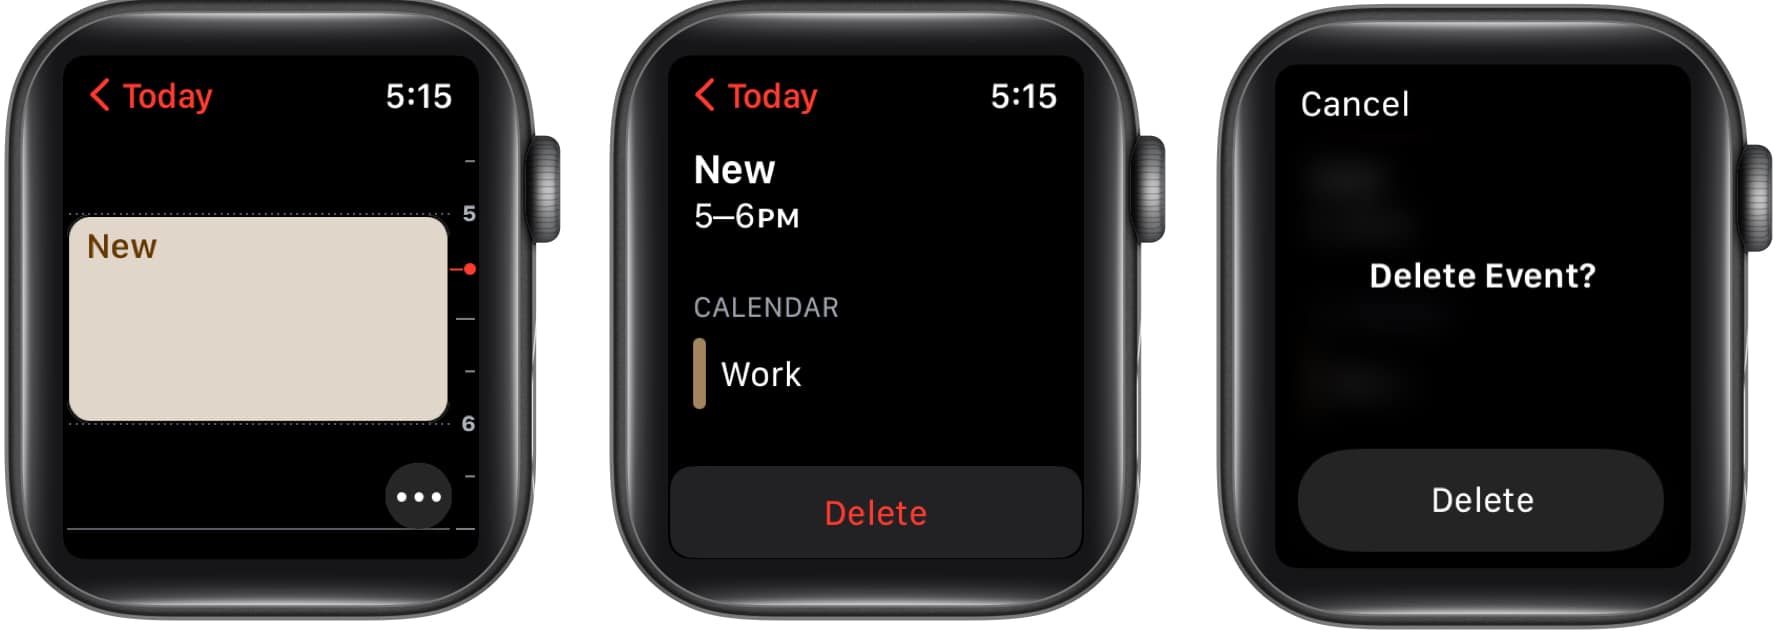 How to delete or change an event on Apple Watch